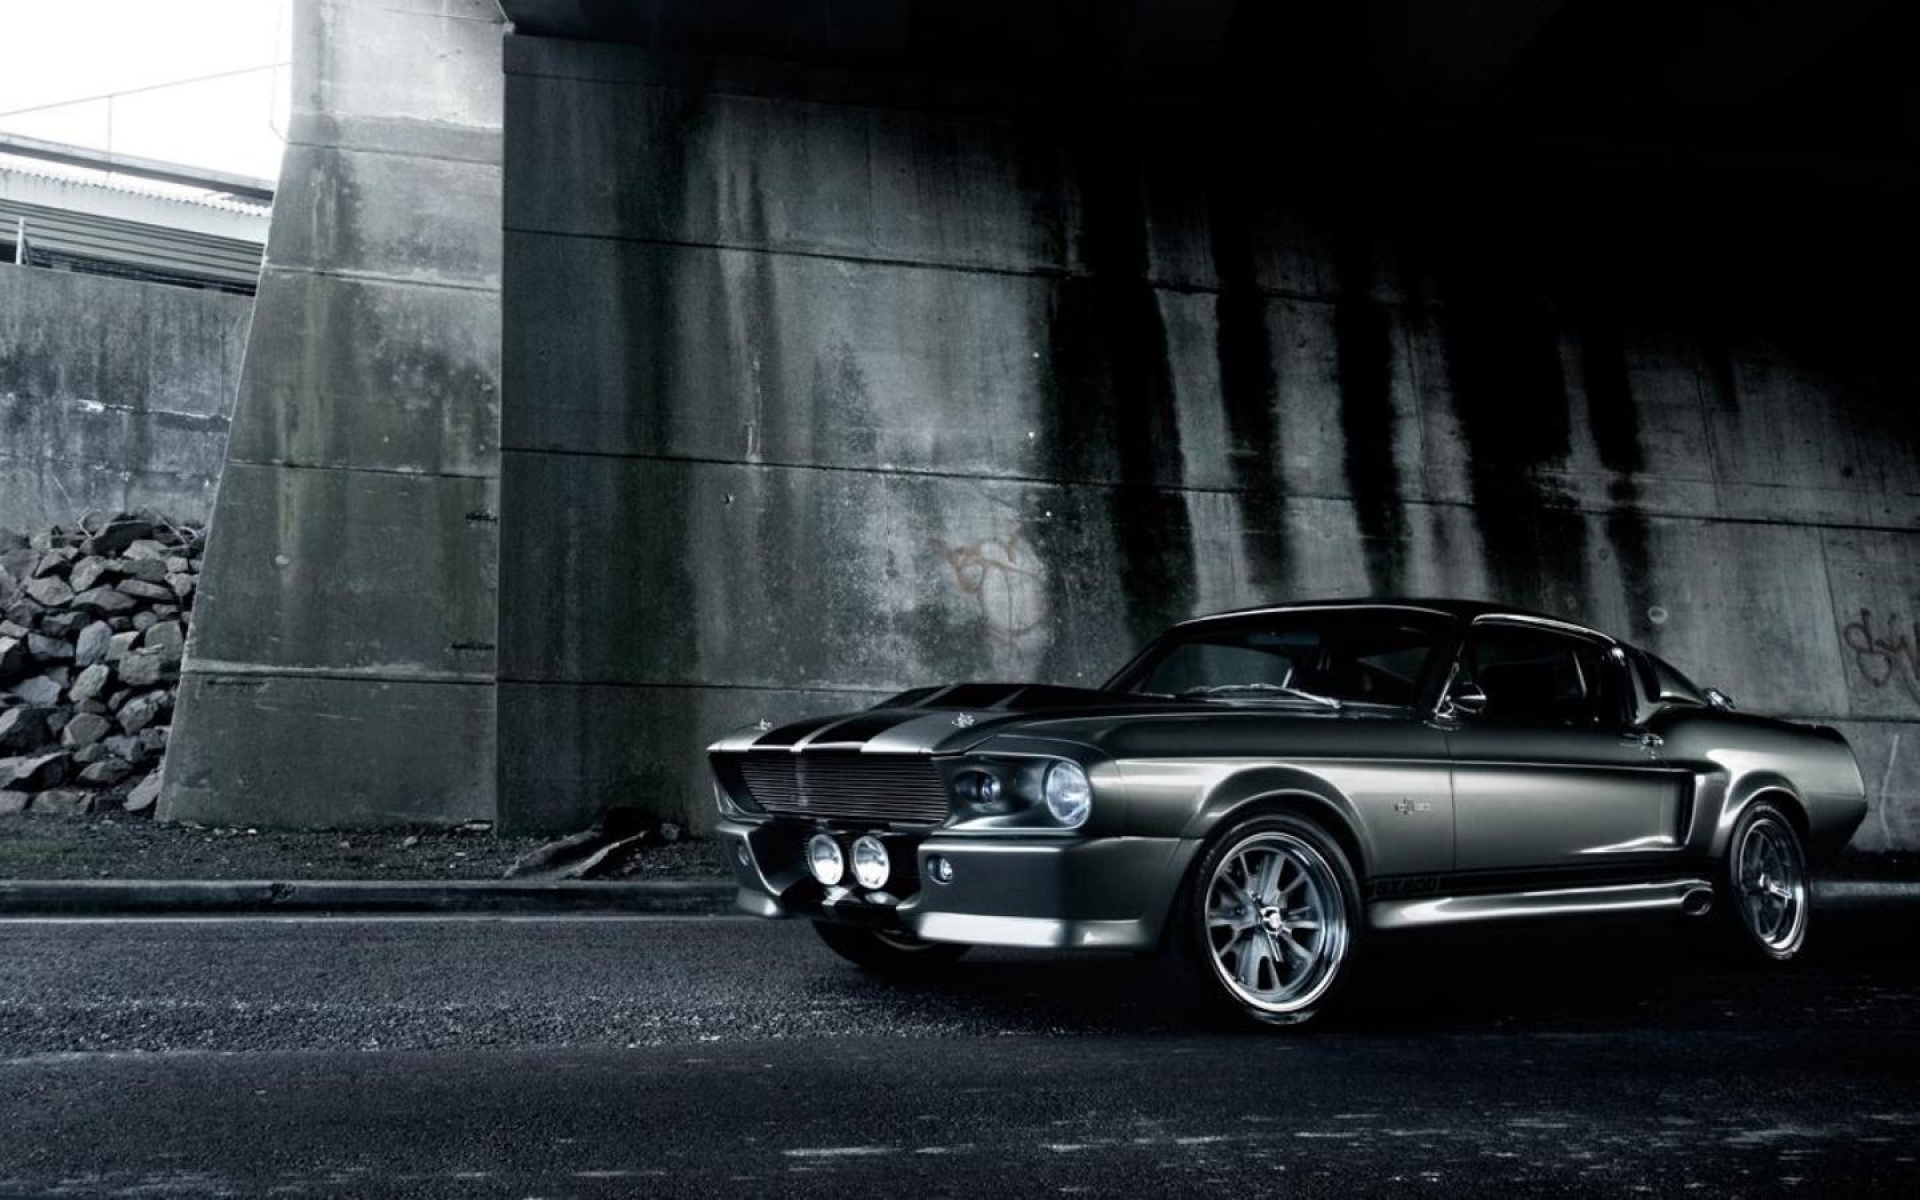 Ford Mustang Black HD Wallpaper Background Image